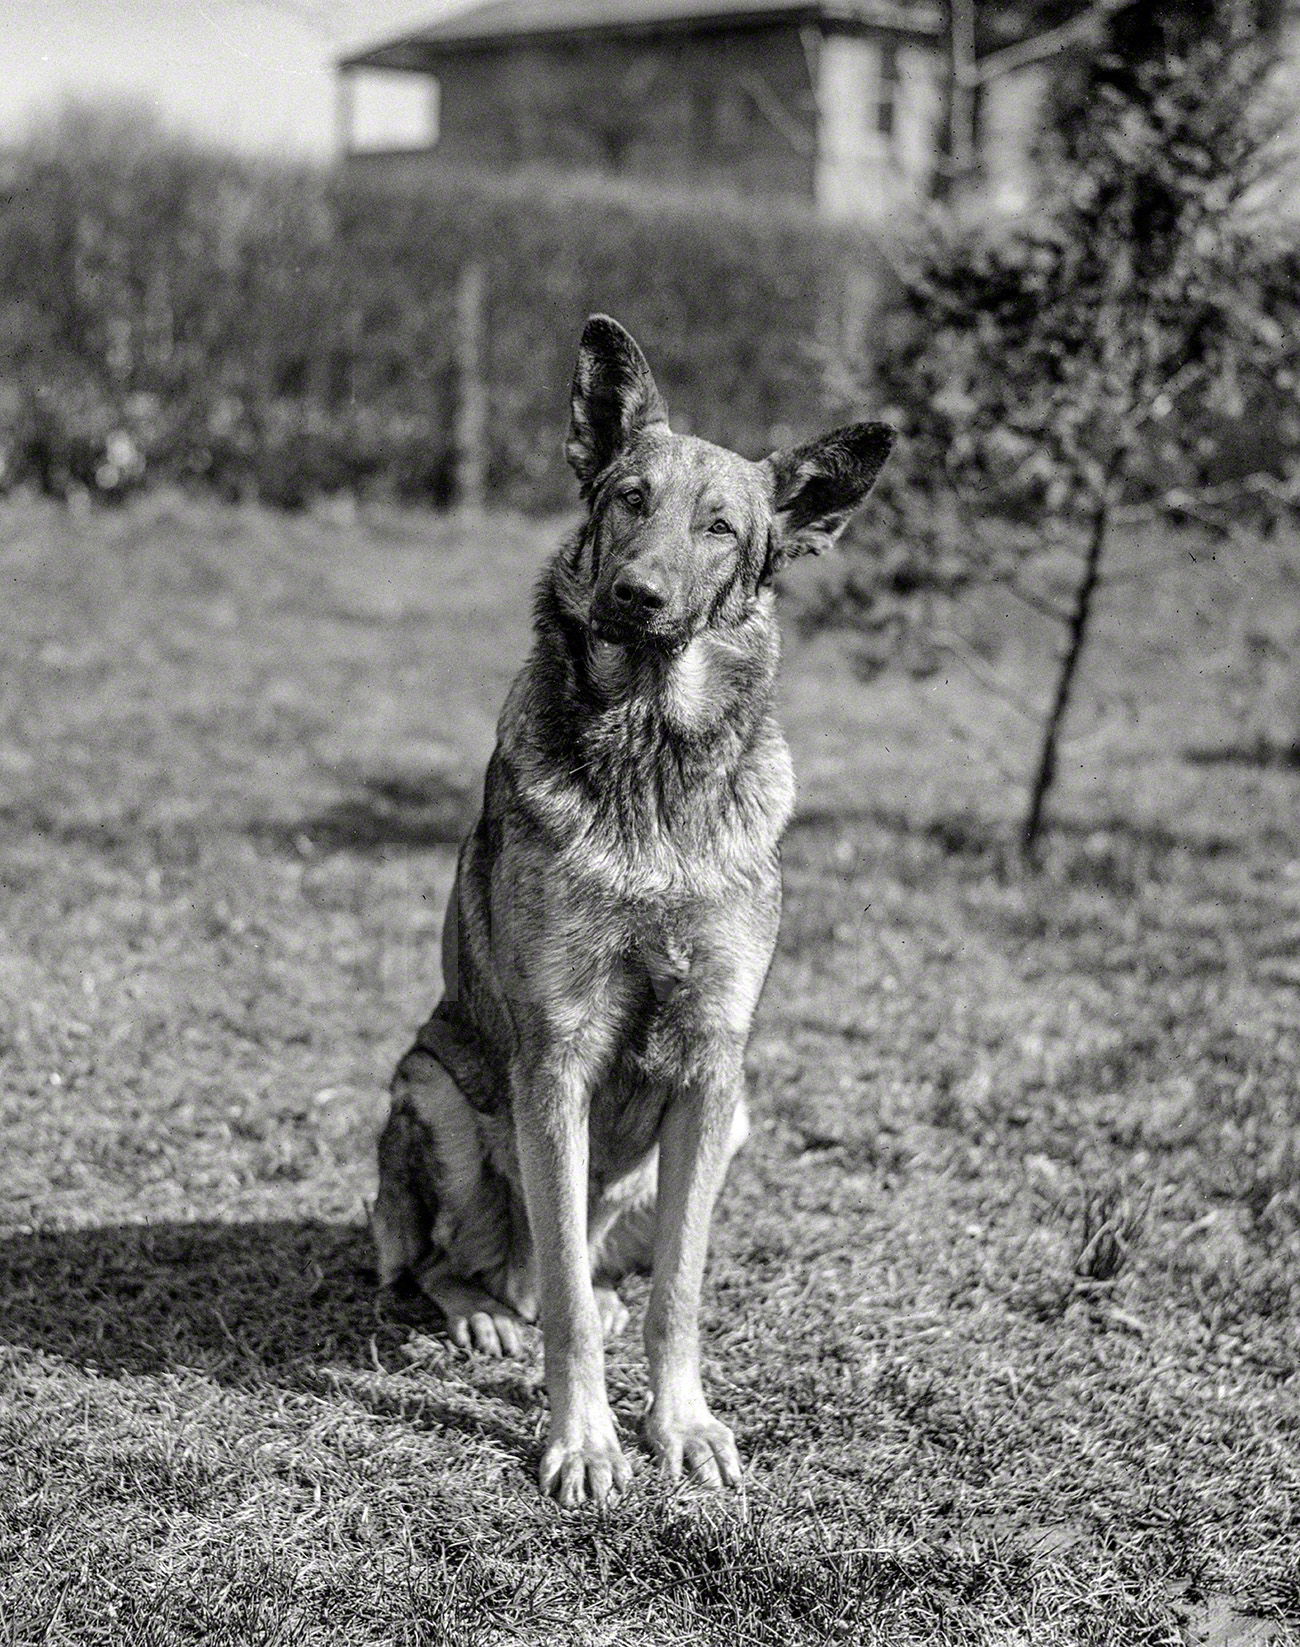 Washington, D.C., 1923. "Police dog -- Gus Buchholz." About to take a bite out of something. Harris & Ewing Collection glass negative. View full size.